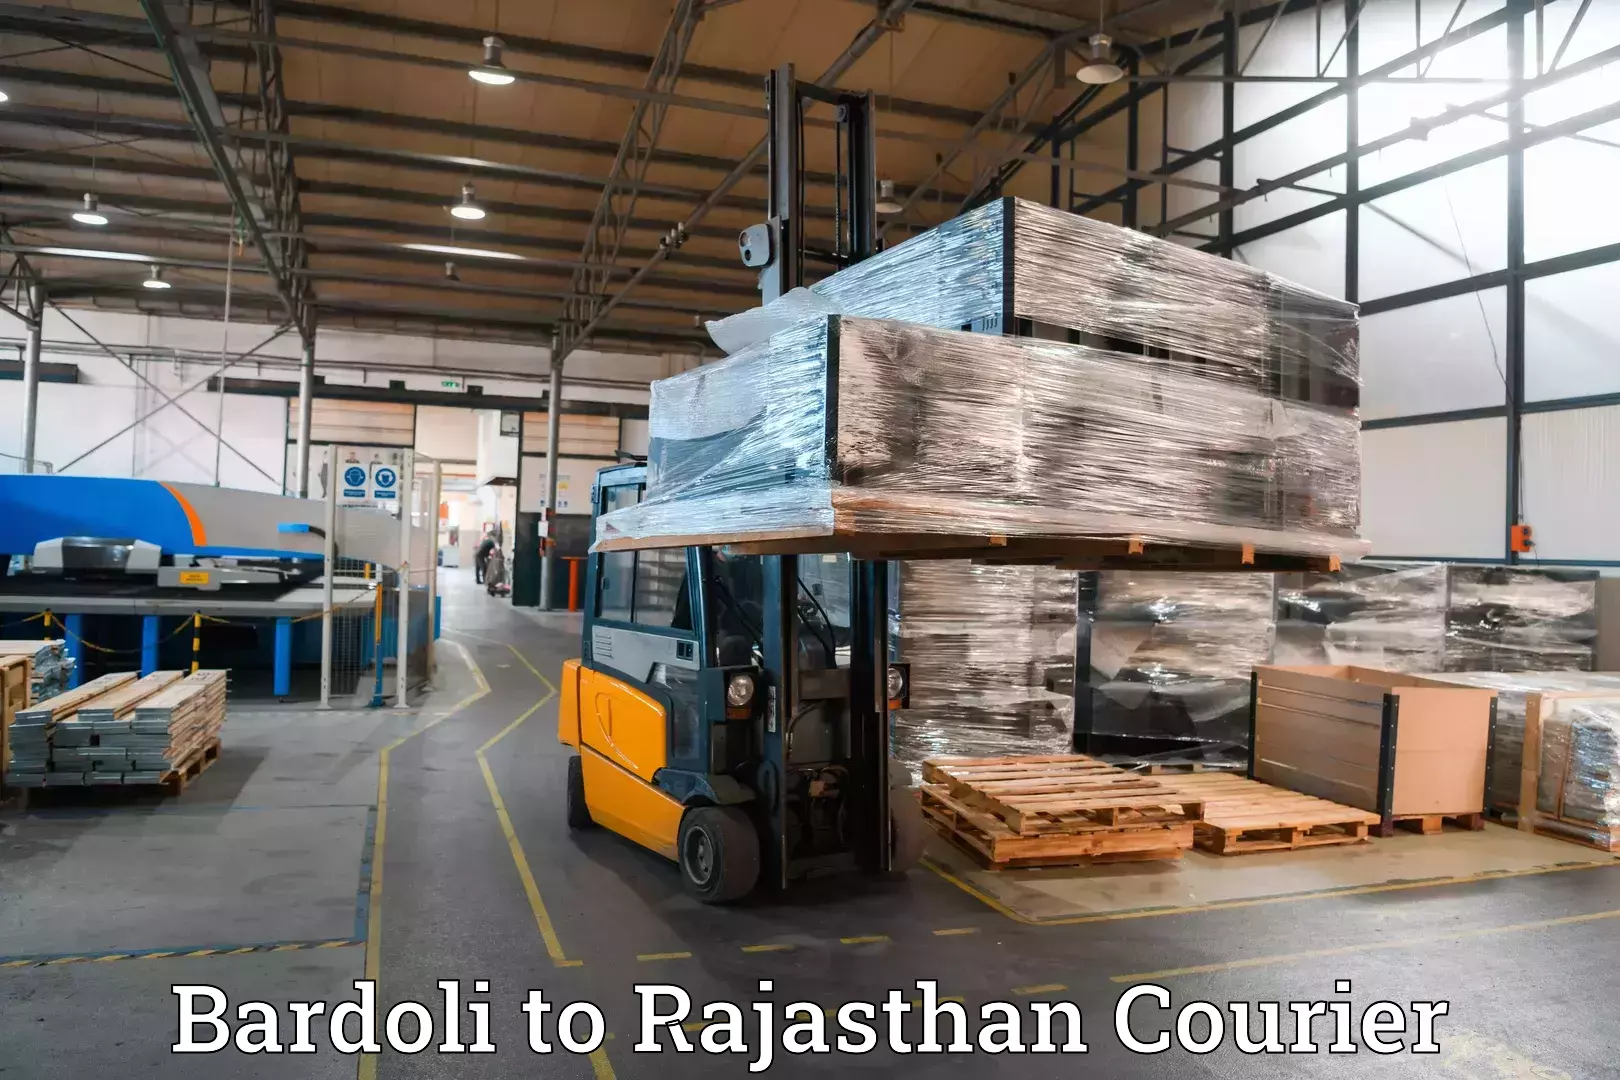 Luggage delivery network Bardoli to Rajasthan